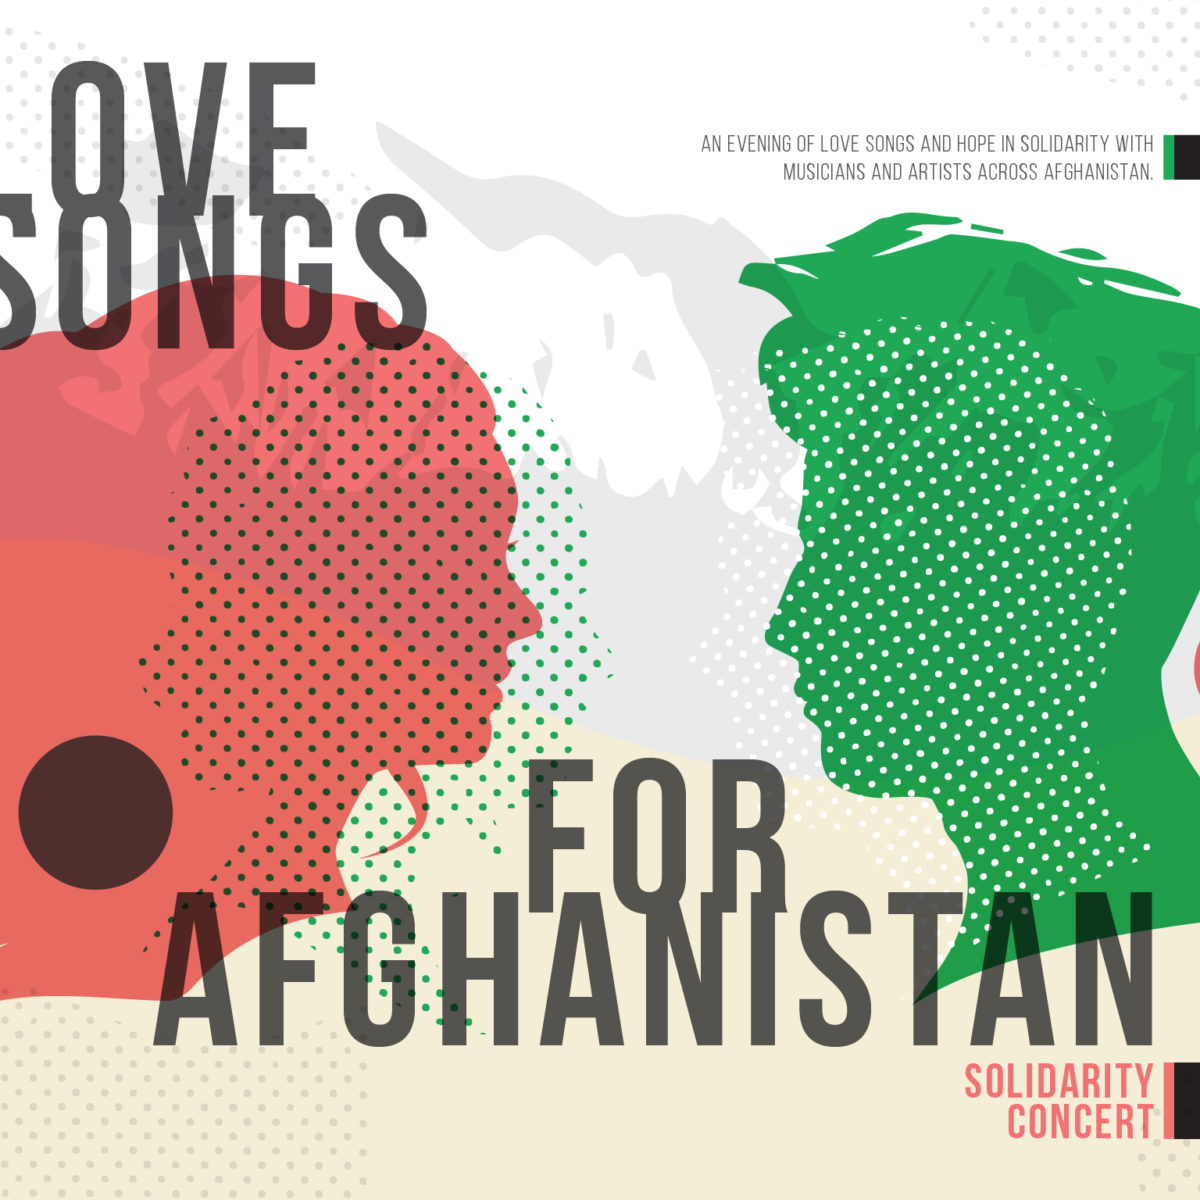 The Con conducts global concert series in support of Afghan musicians